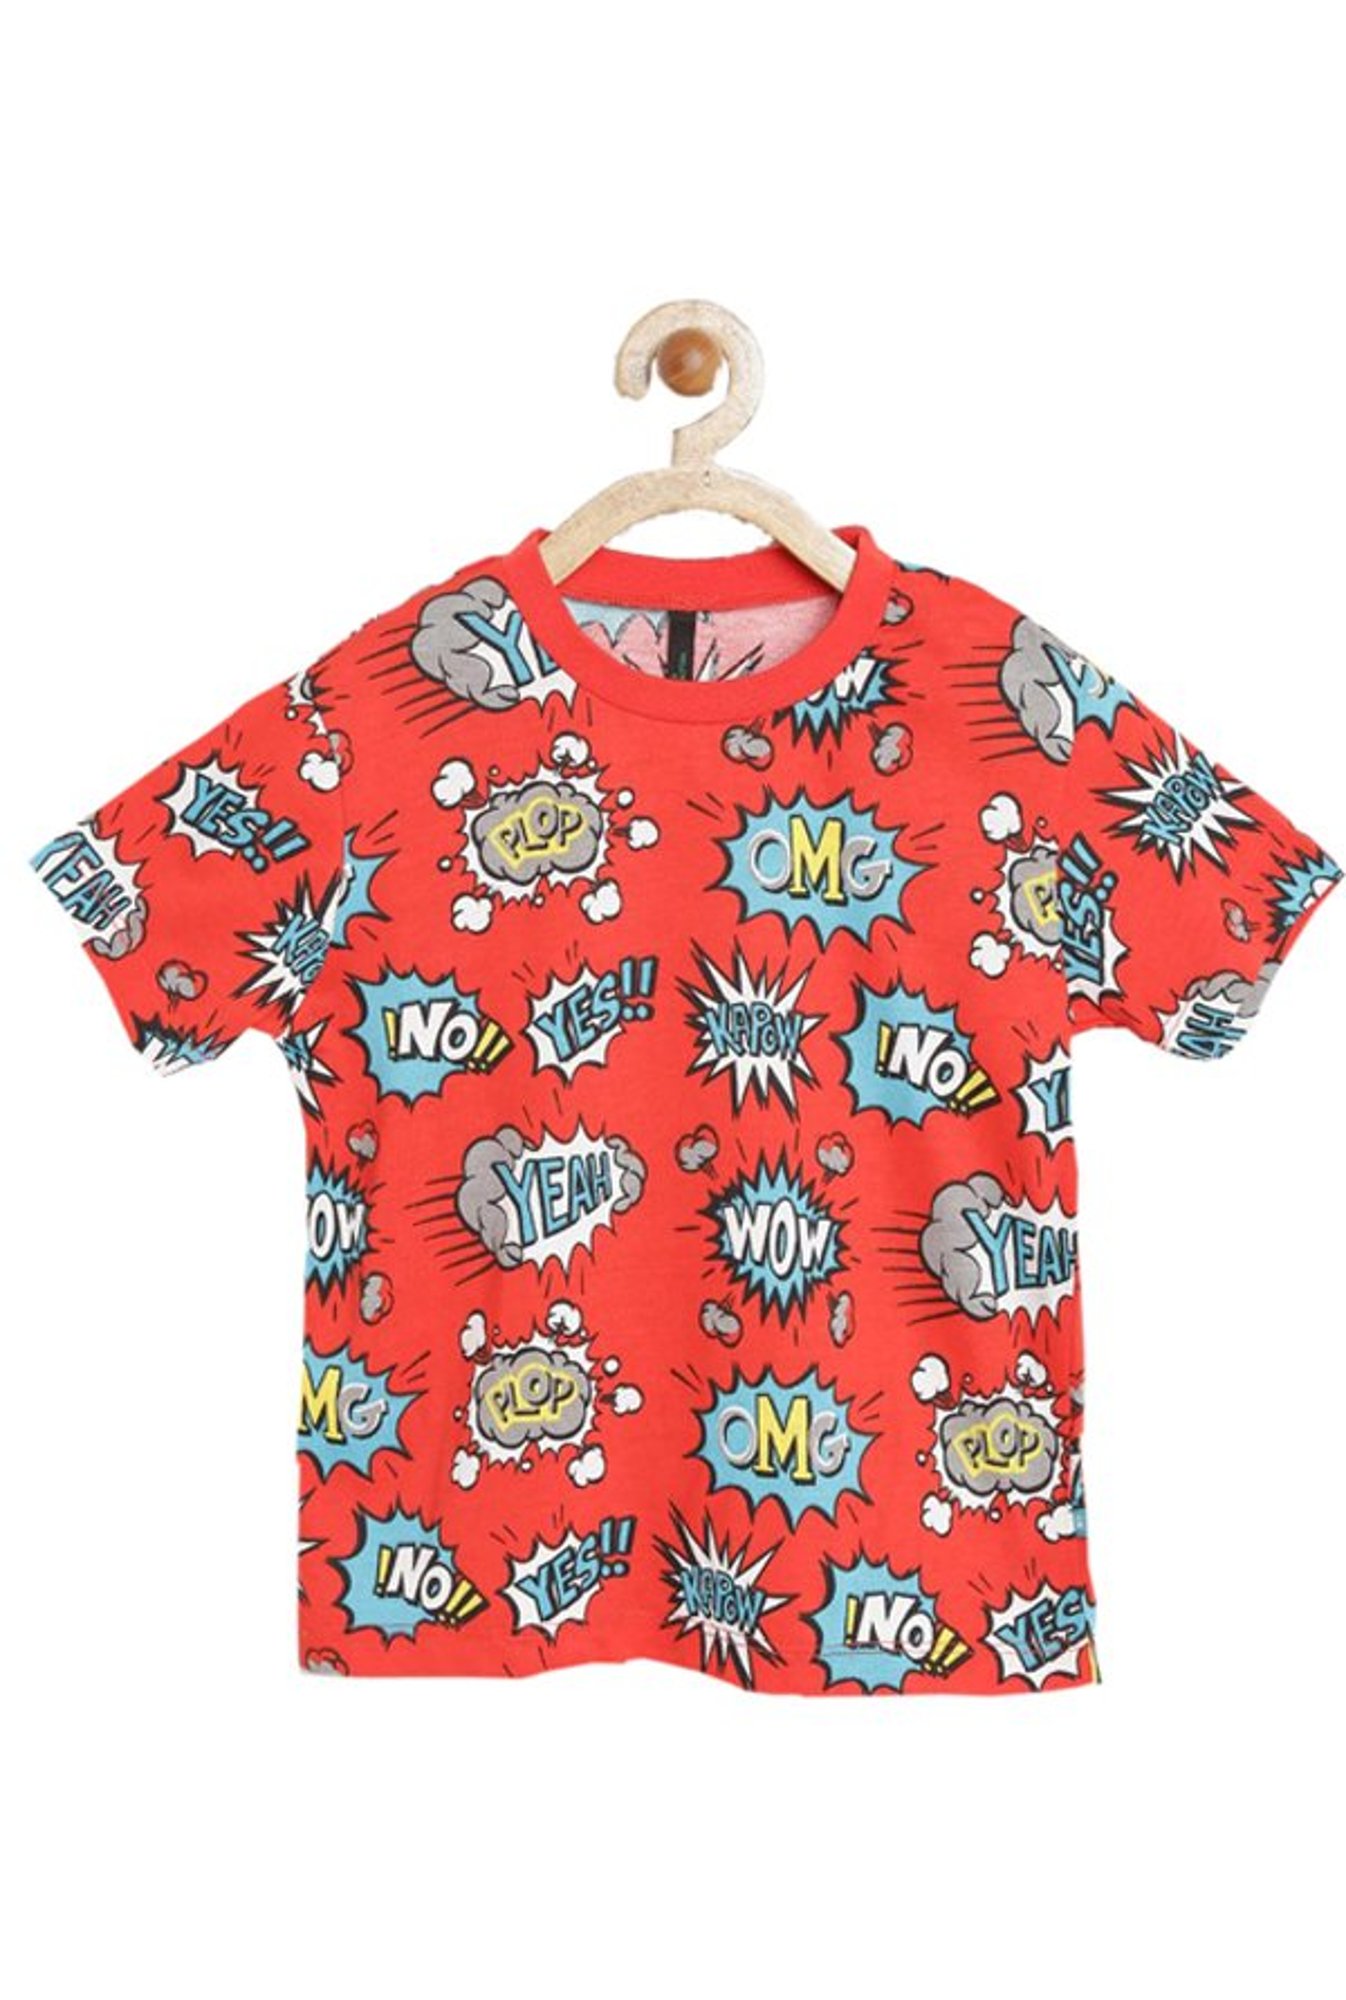 Buy United Colors Of Benetton Kids Red Printed T Shirt For Boys Clothing Online Tata Cliq